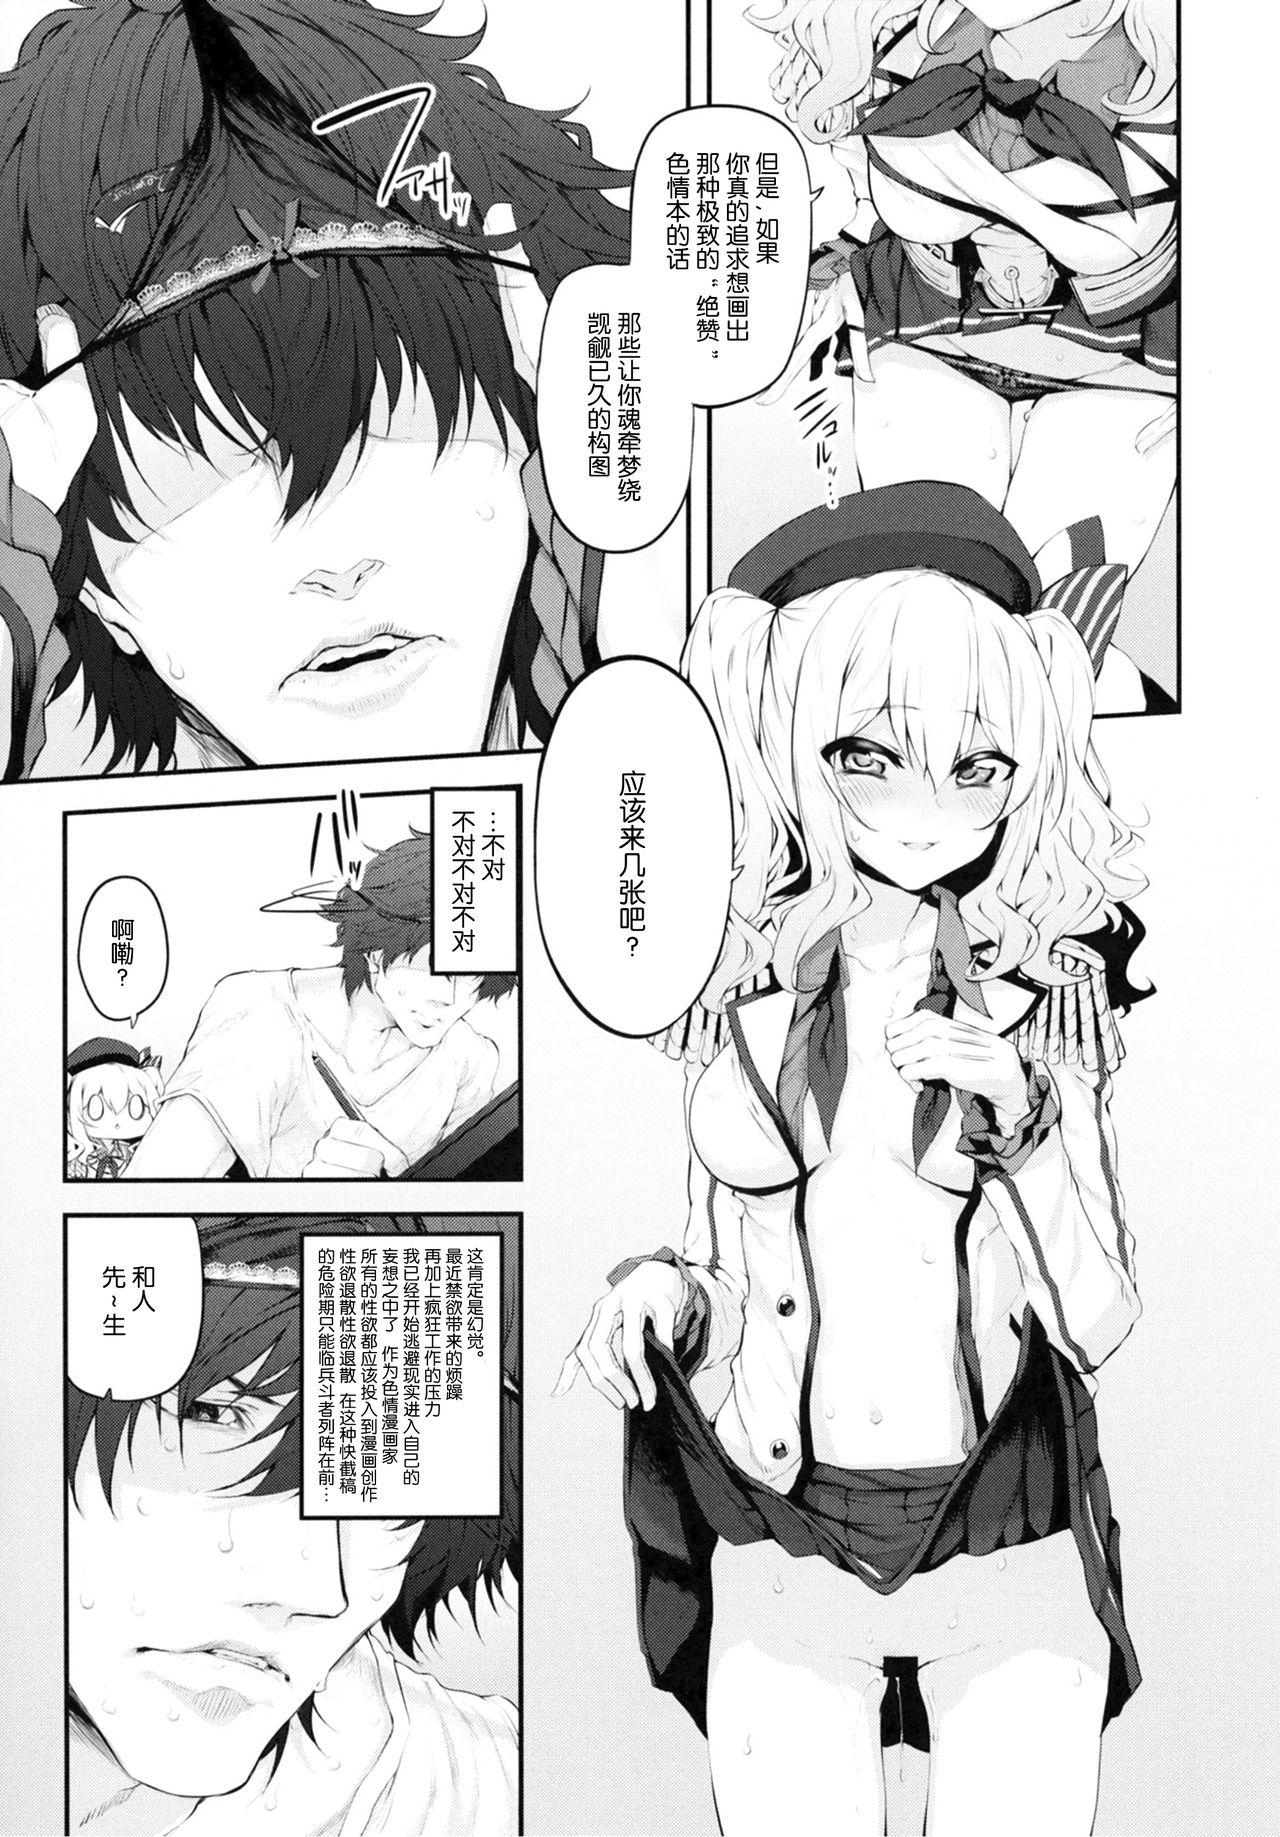 Bald Pussy COSBITCH! Marked-girls Origin Vol. 1 - Kantai collection Animated - Page 11